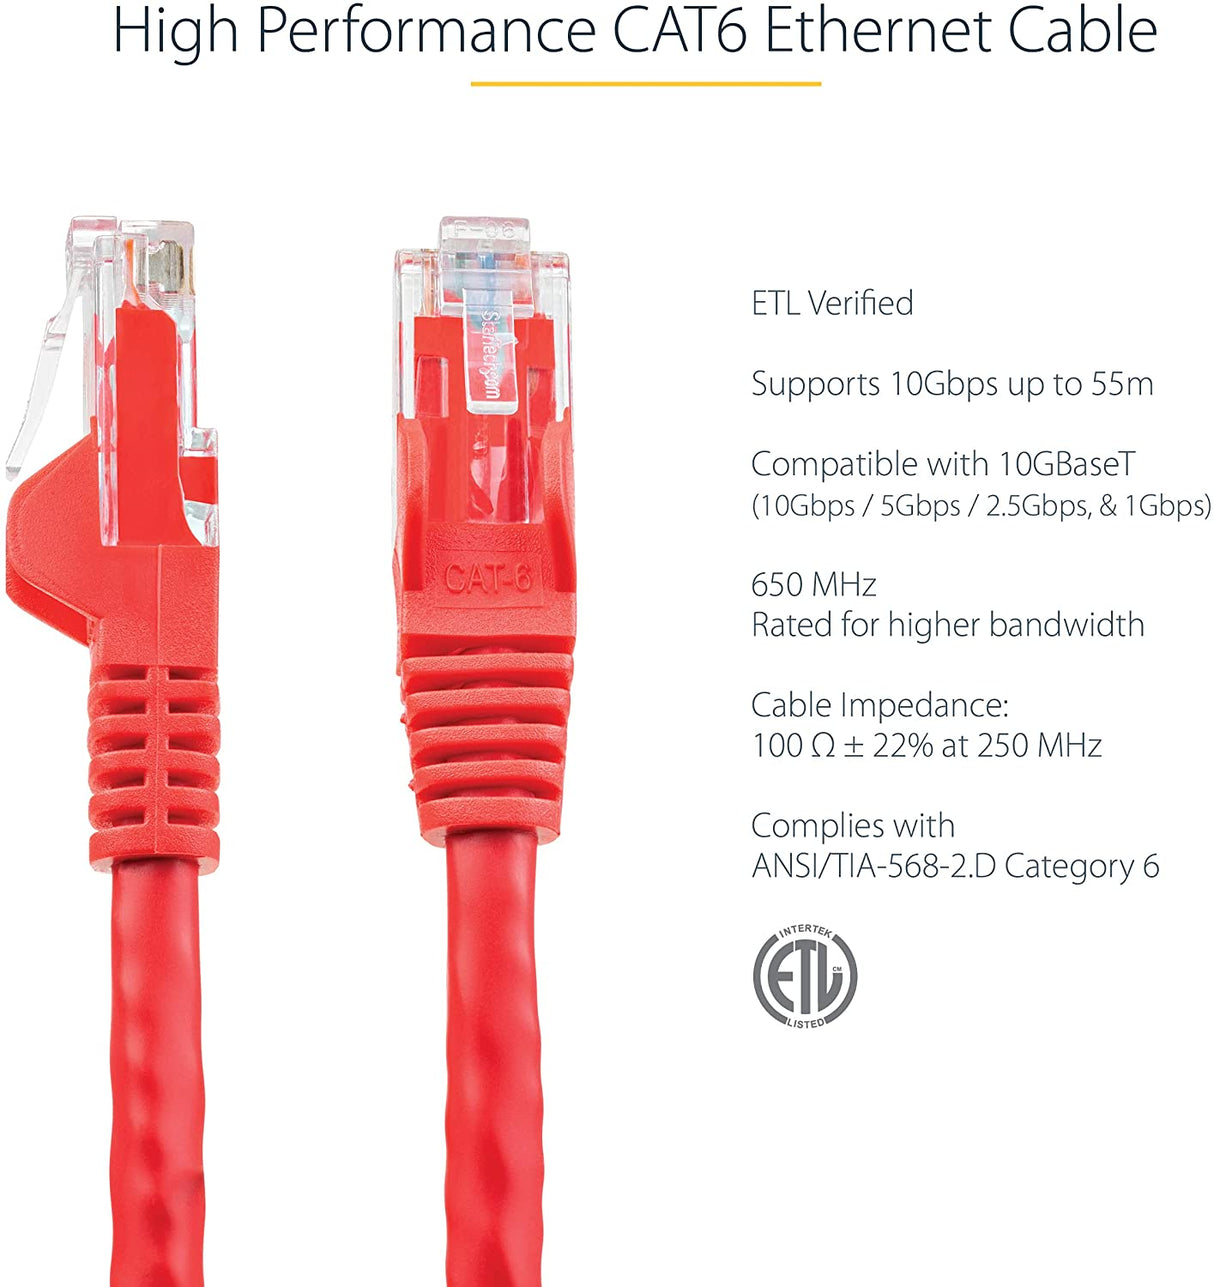 StarTech.com 2ft CAT6 Ethernet Cable - Red CAT 6 Gigabit Ethernet Wire -650MHz 100W PoE RJ45 UTP Network/Patch Cord Snagless w/Strain Relief Fluke Tested/Wiring is UL Certified/TIA (N6PATCH2RD) Red 2 ft / 0.6 m 1 Pack